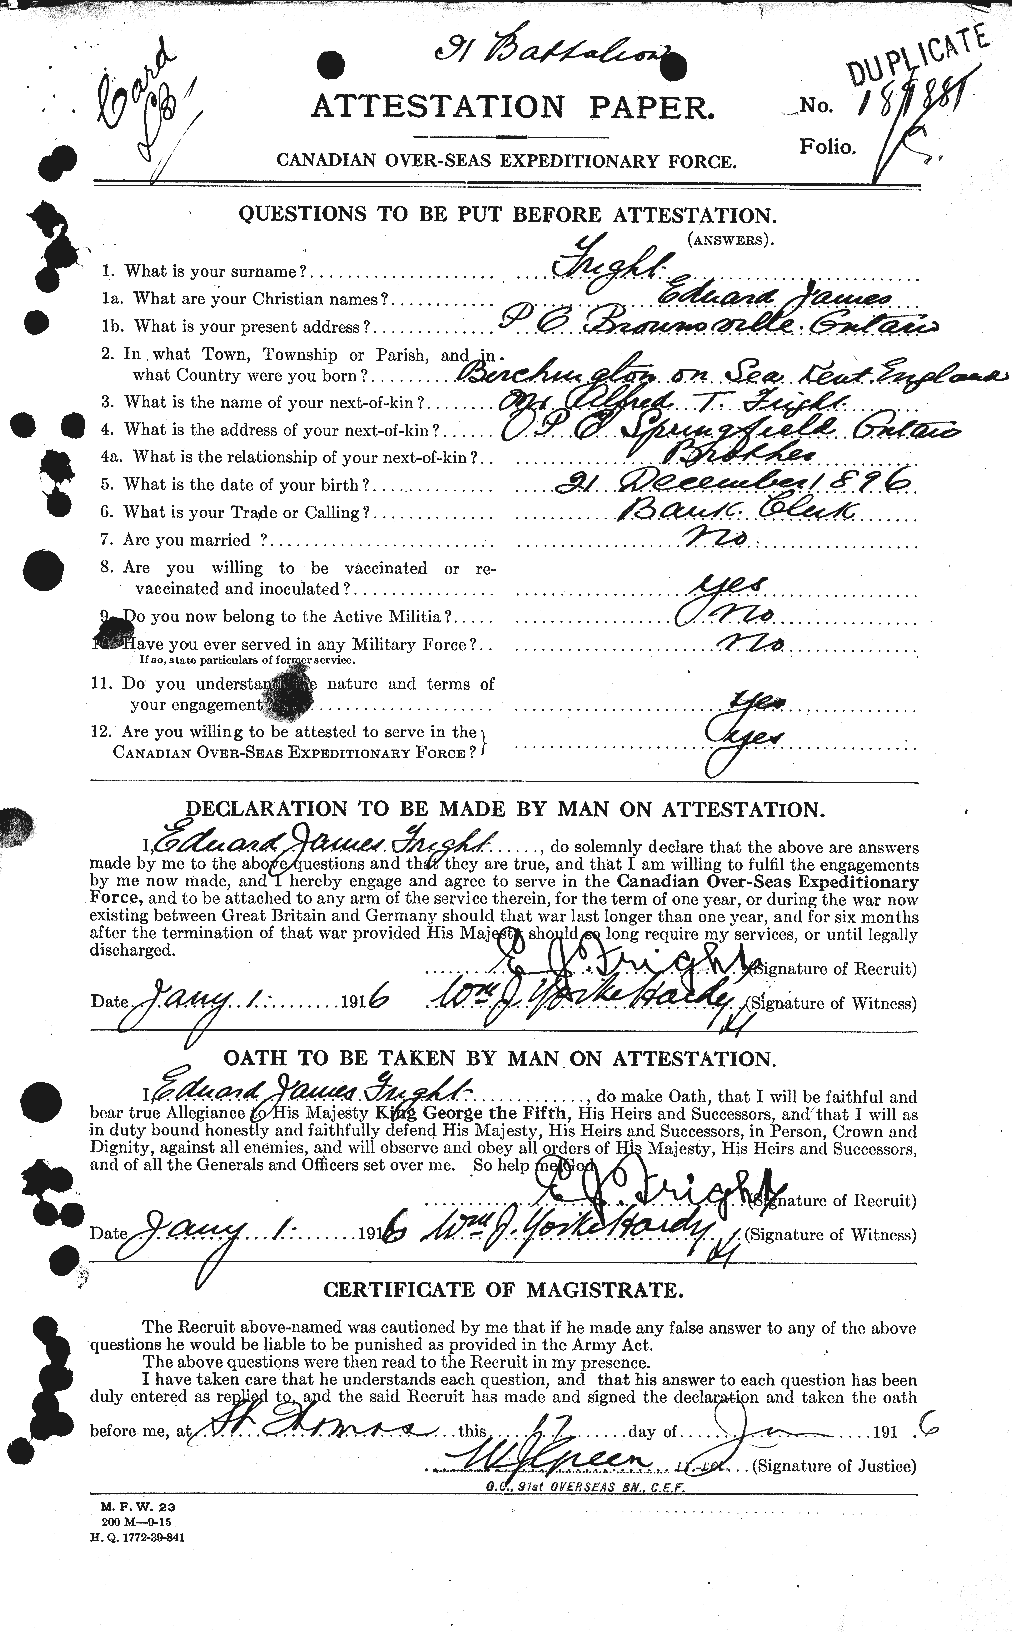 Personnel Records of the First World War - CEF 337417a